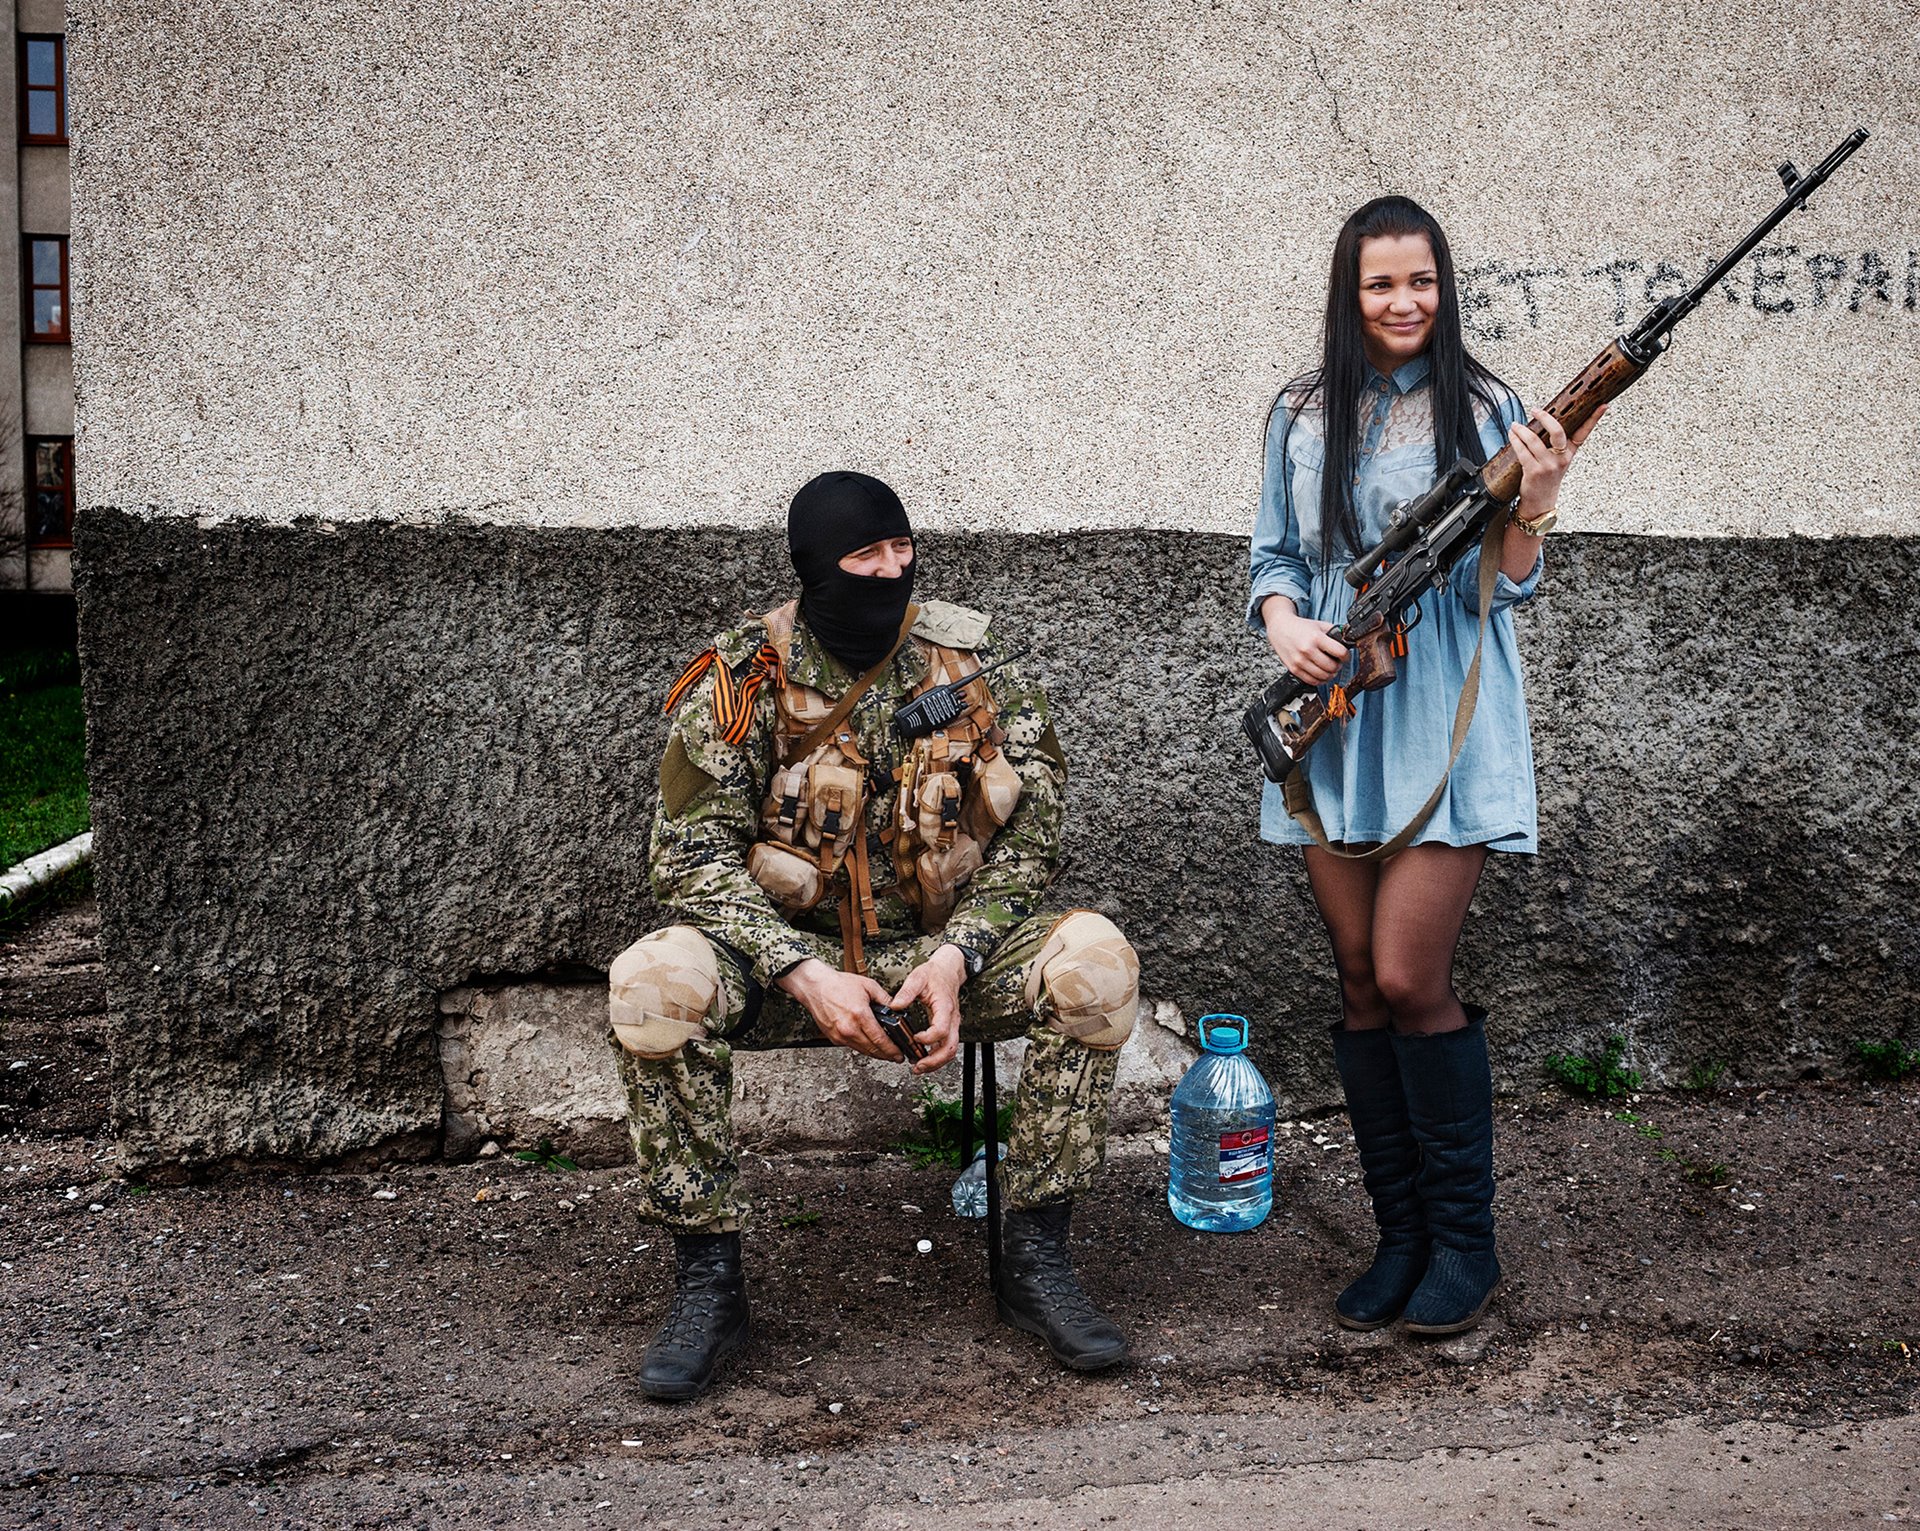 A young woman from Slovyansk, in northeastern Ukraine, poses with a gun while welcoming separatist fighters to the city. &nbsp;Separatist forces had occupied the city hall. Mayor Nellie Shtepa stated her support for the militants, while 150 of their supporters gathered at the local police station.